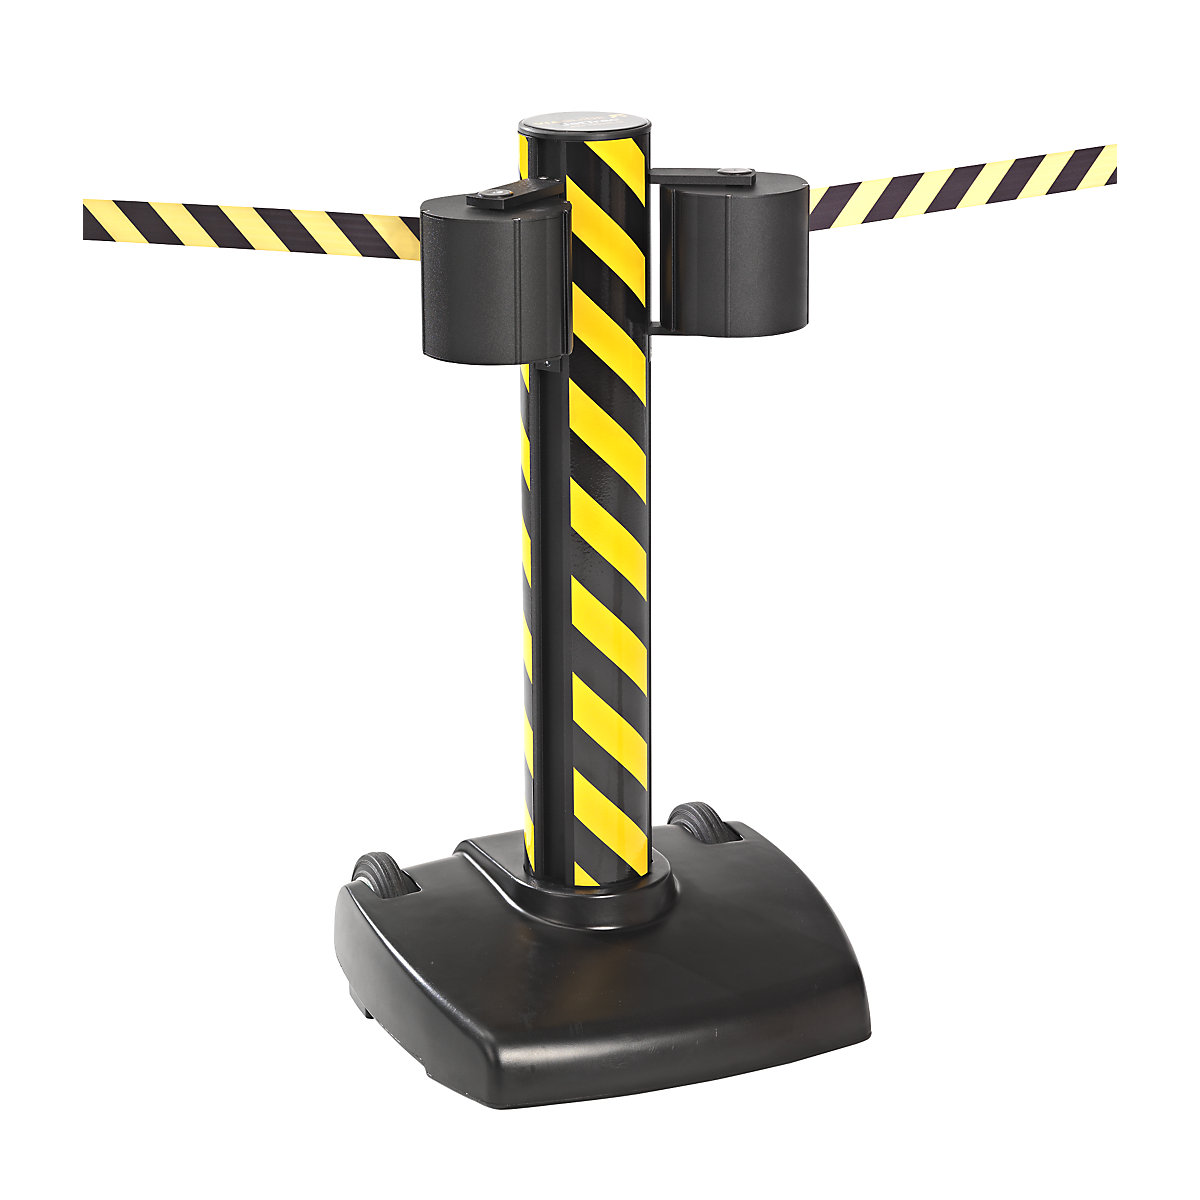 Tape barrier, mobile, with 2 x 22 m tape belts, yellow / black belt